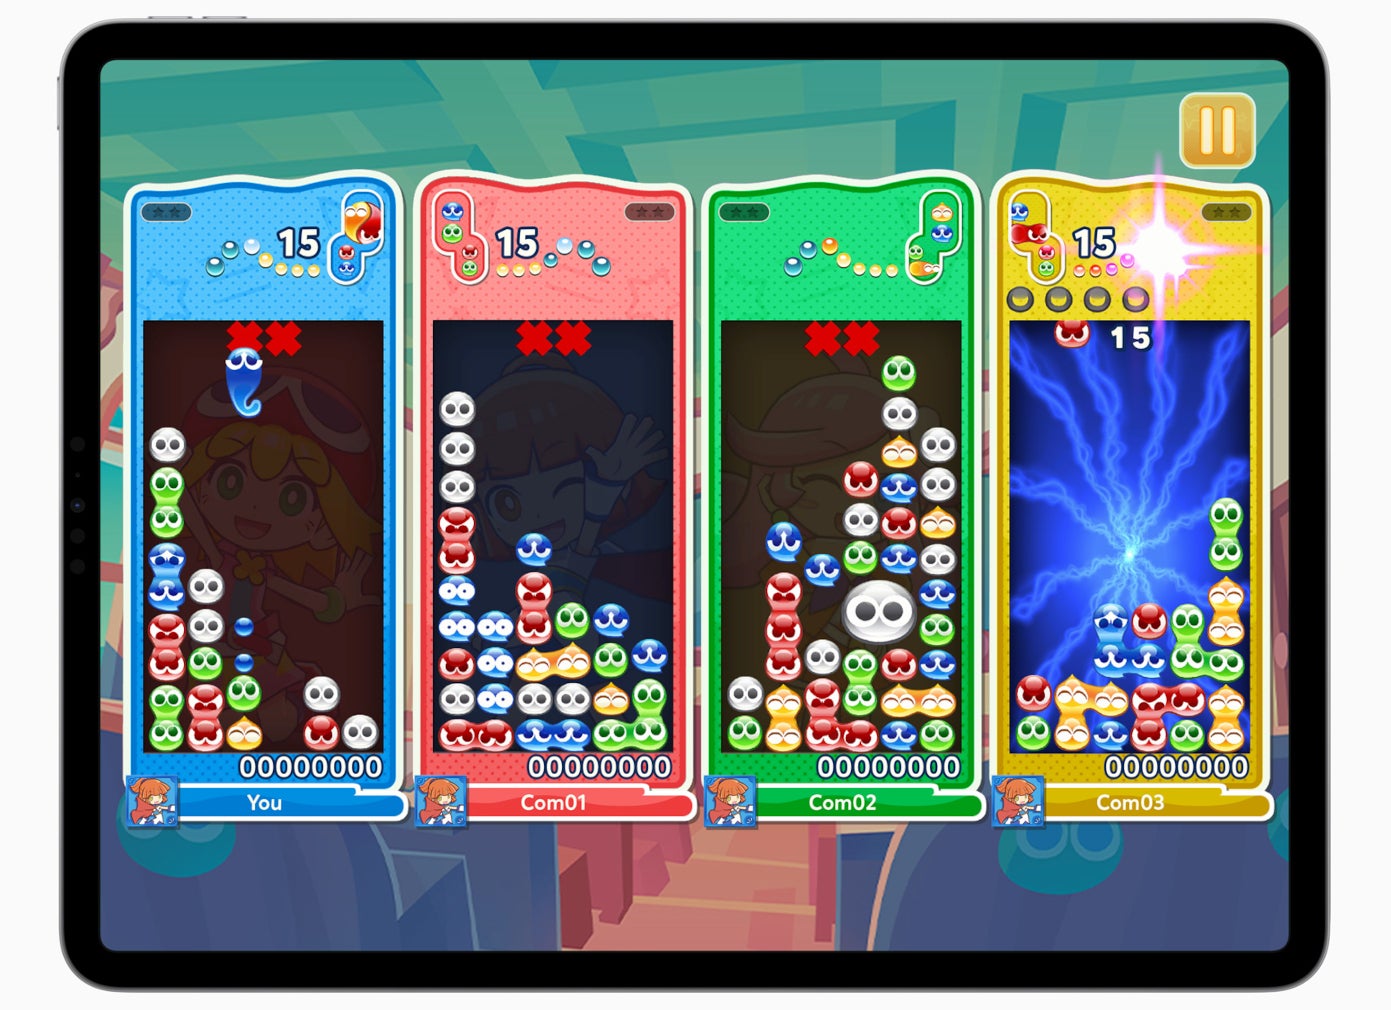 Puyo Puyo Puzzle Pop - Apple Arcade getting five new games playable on the Vision Pro